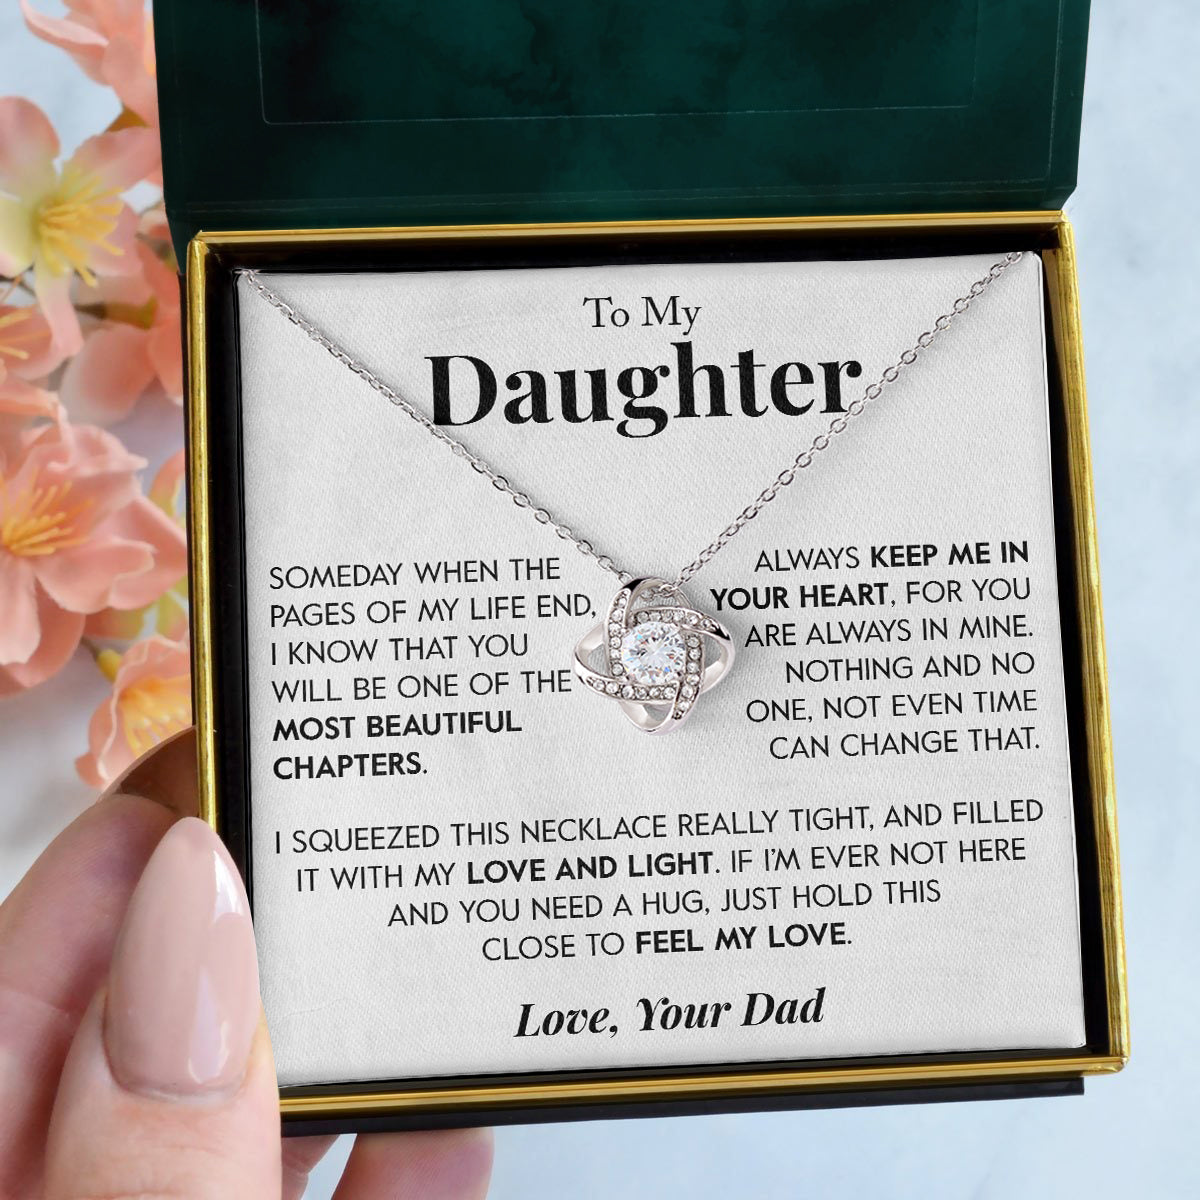 To My Daughter | "Do Your Best" | Love Knot Necklace